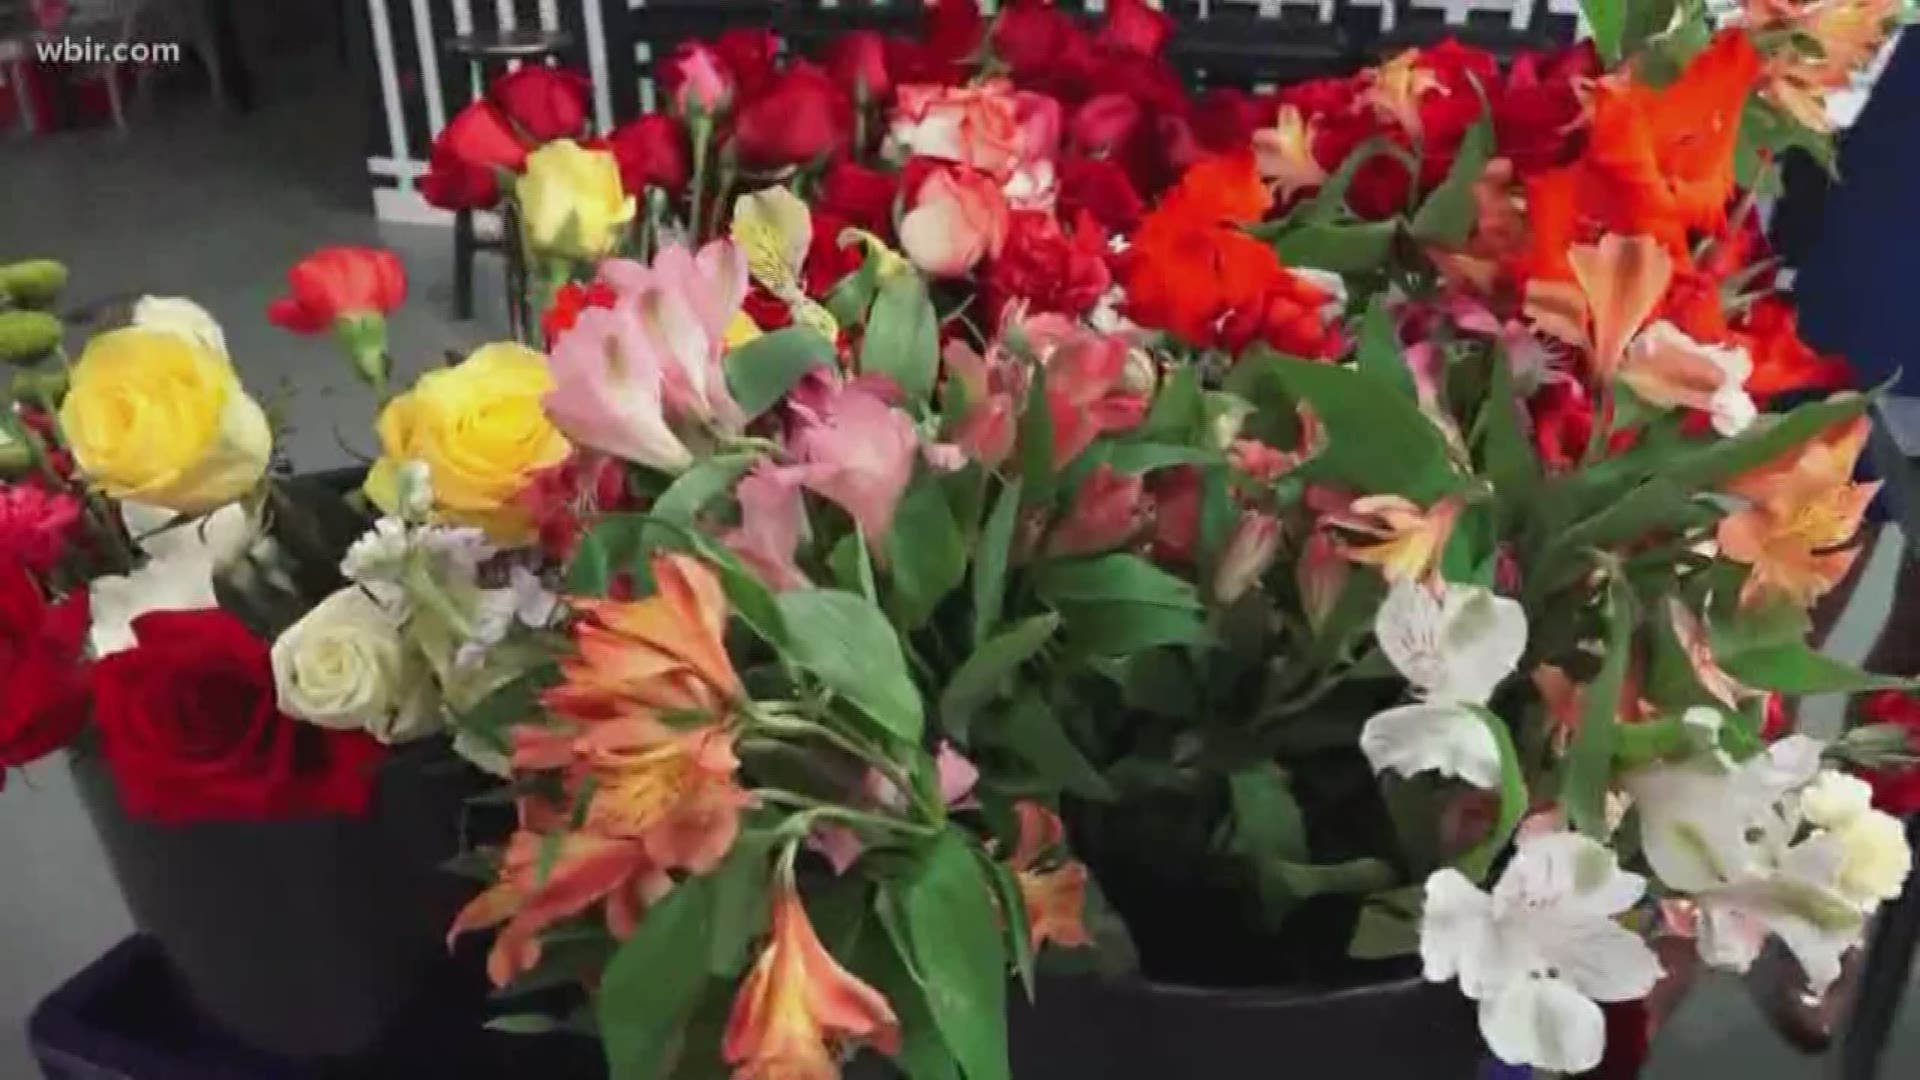 "Random Acts has a very simple mission, we recycle flowers from events, and grocery stores then re-purpose them into bouquets delivered to hospitals, health care facilities, hospice and assisted living facilities," explained Christina Sayer.